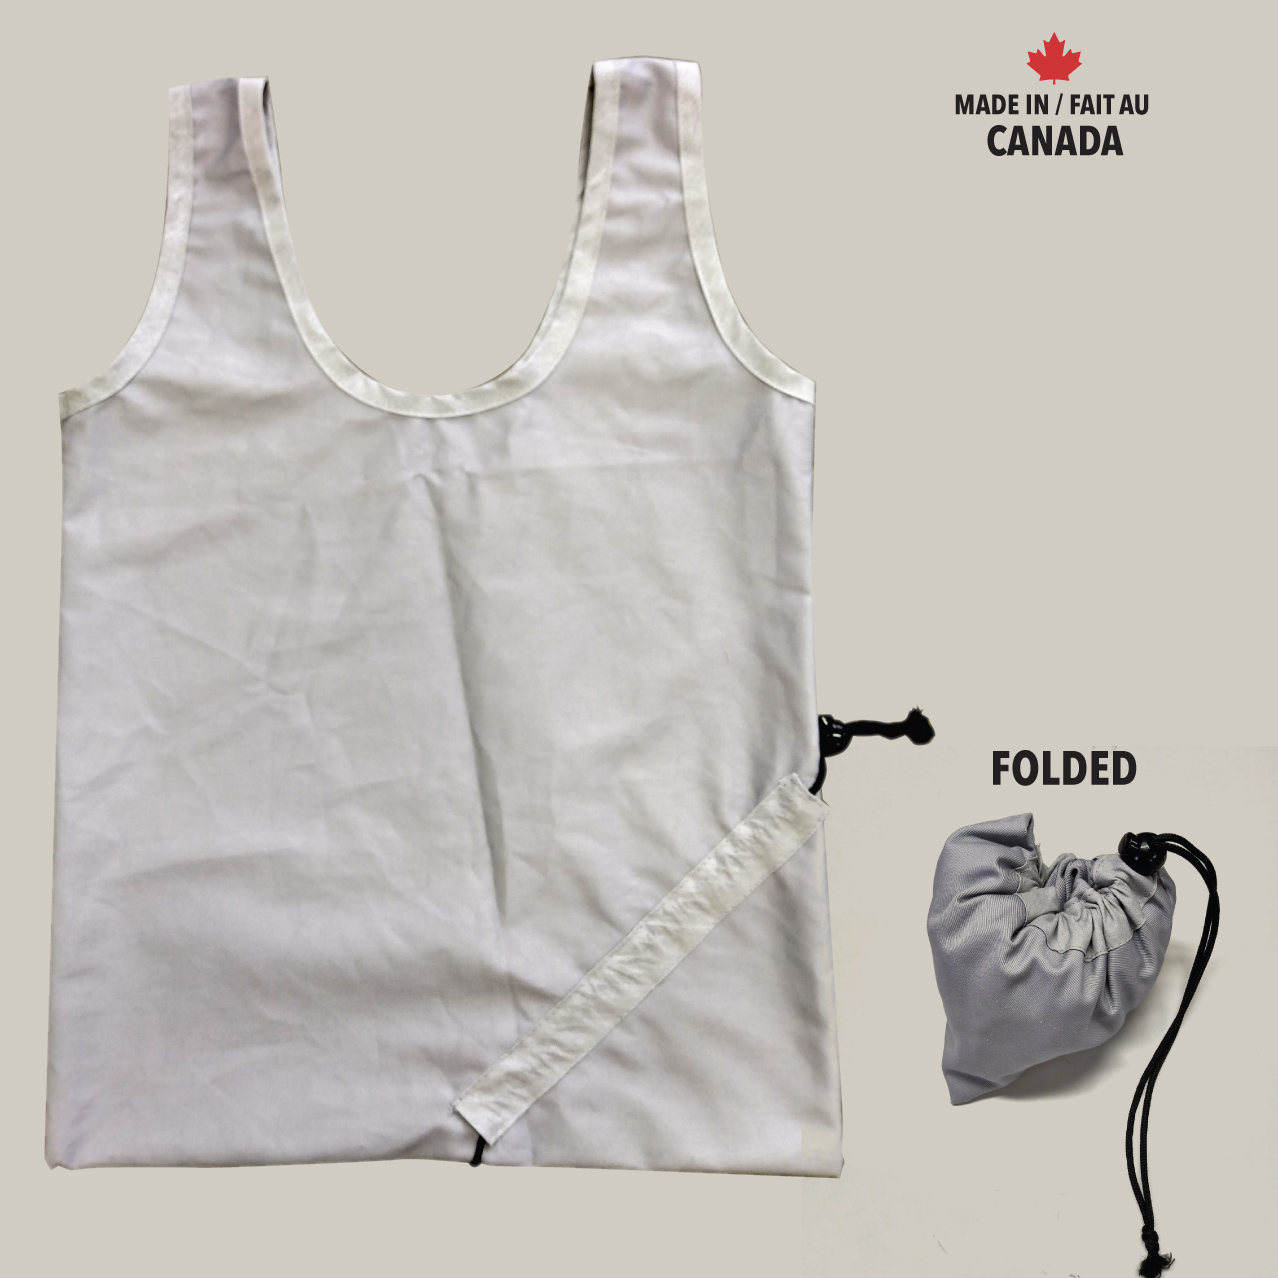 Made in Canada polycotton twill folding bag